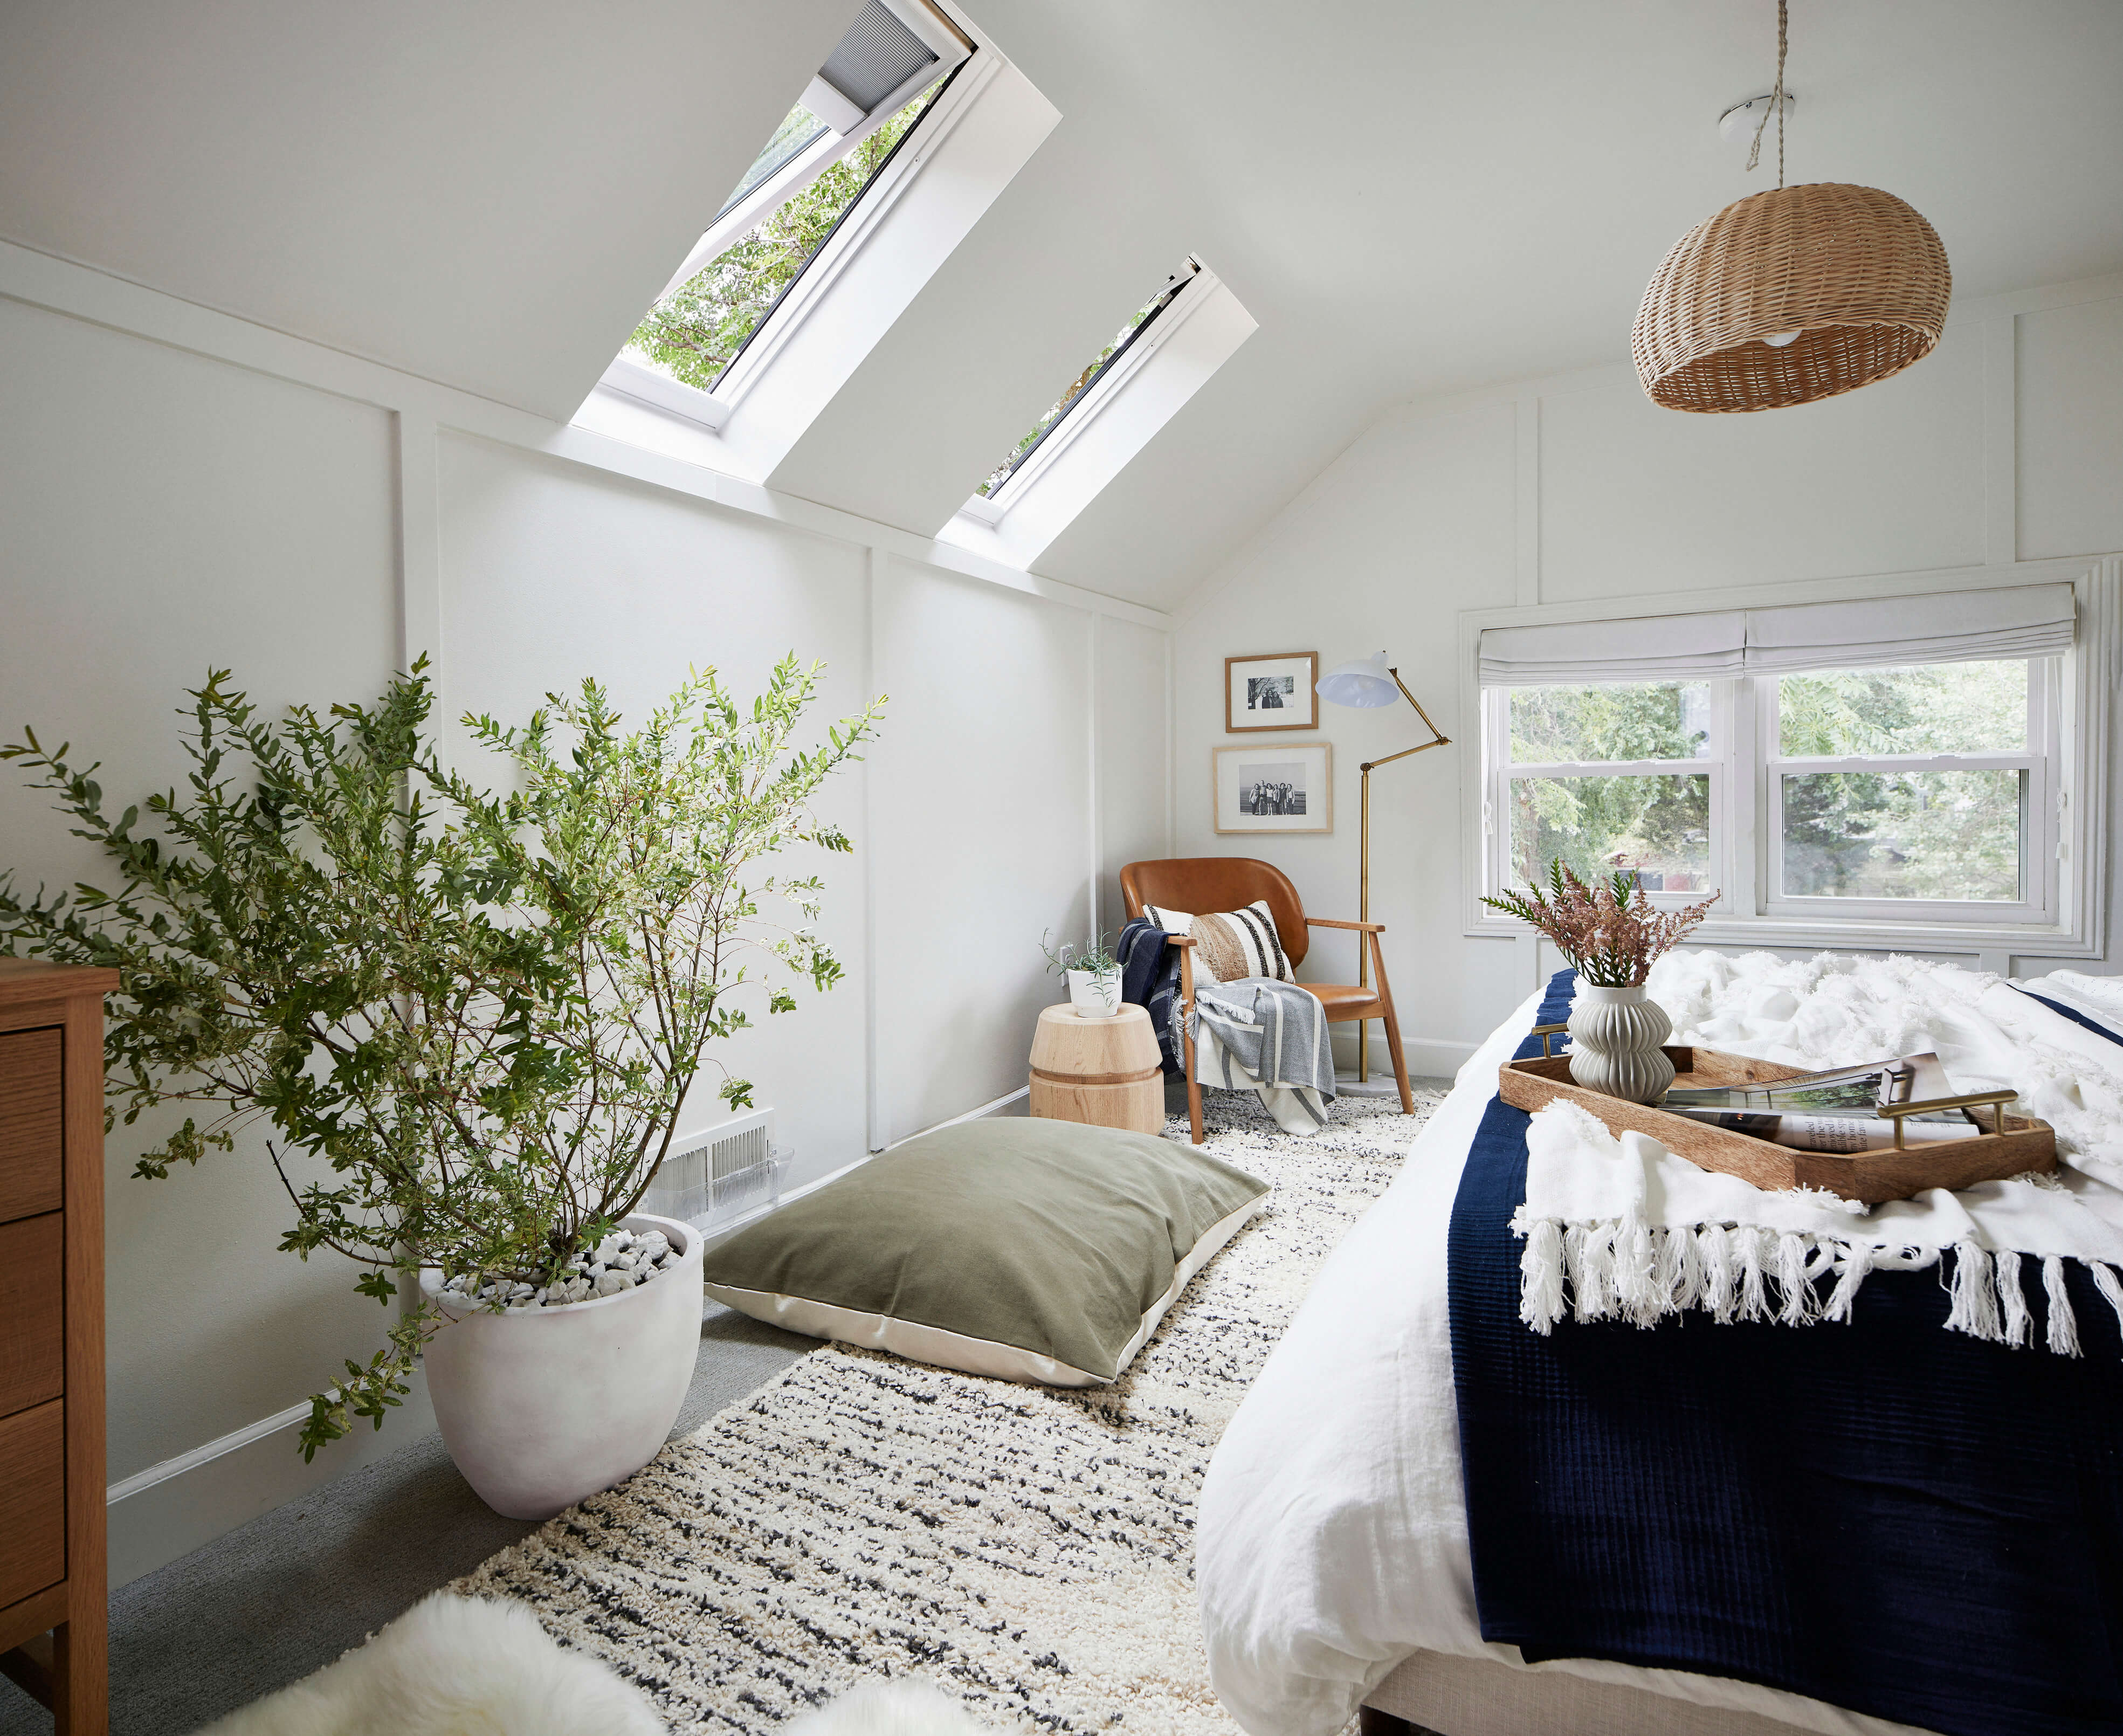 A bright bedroom space with two roof windows